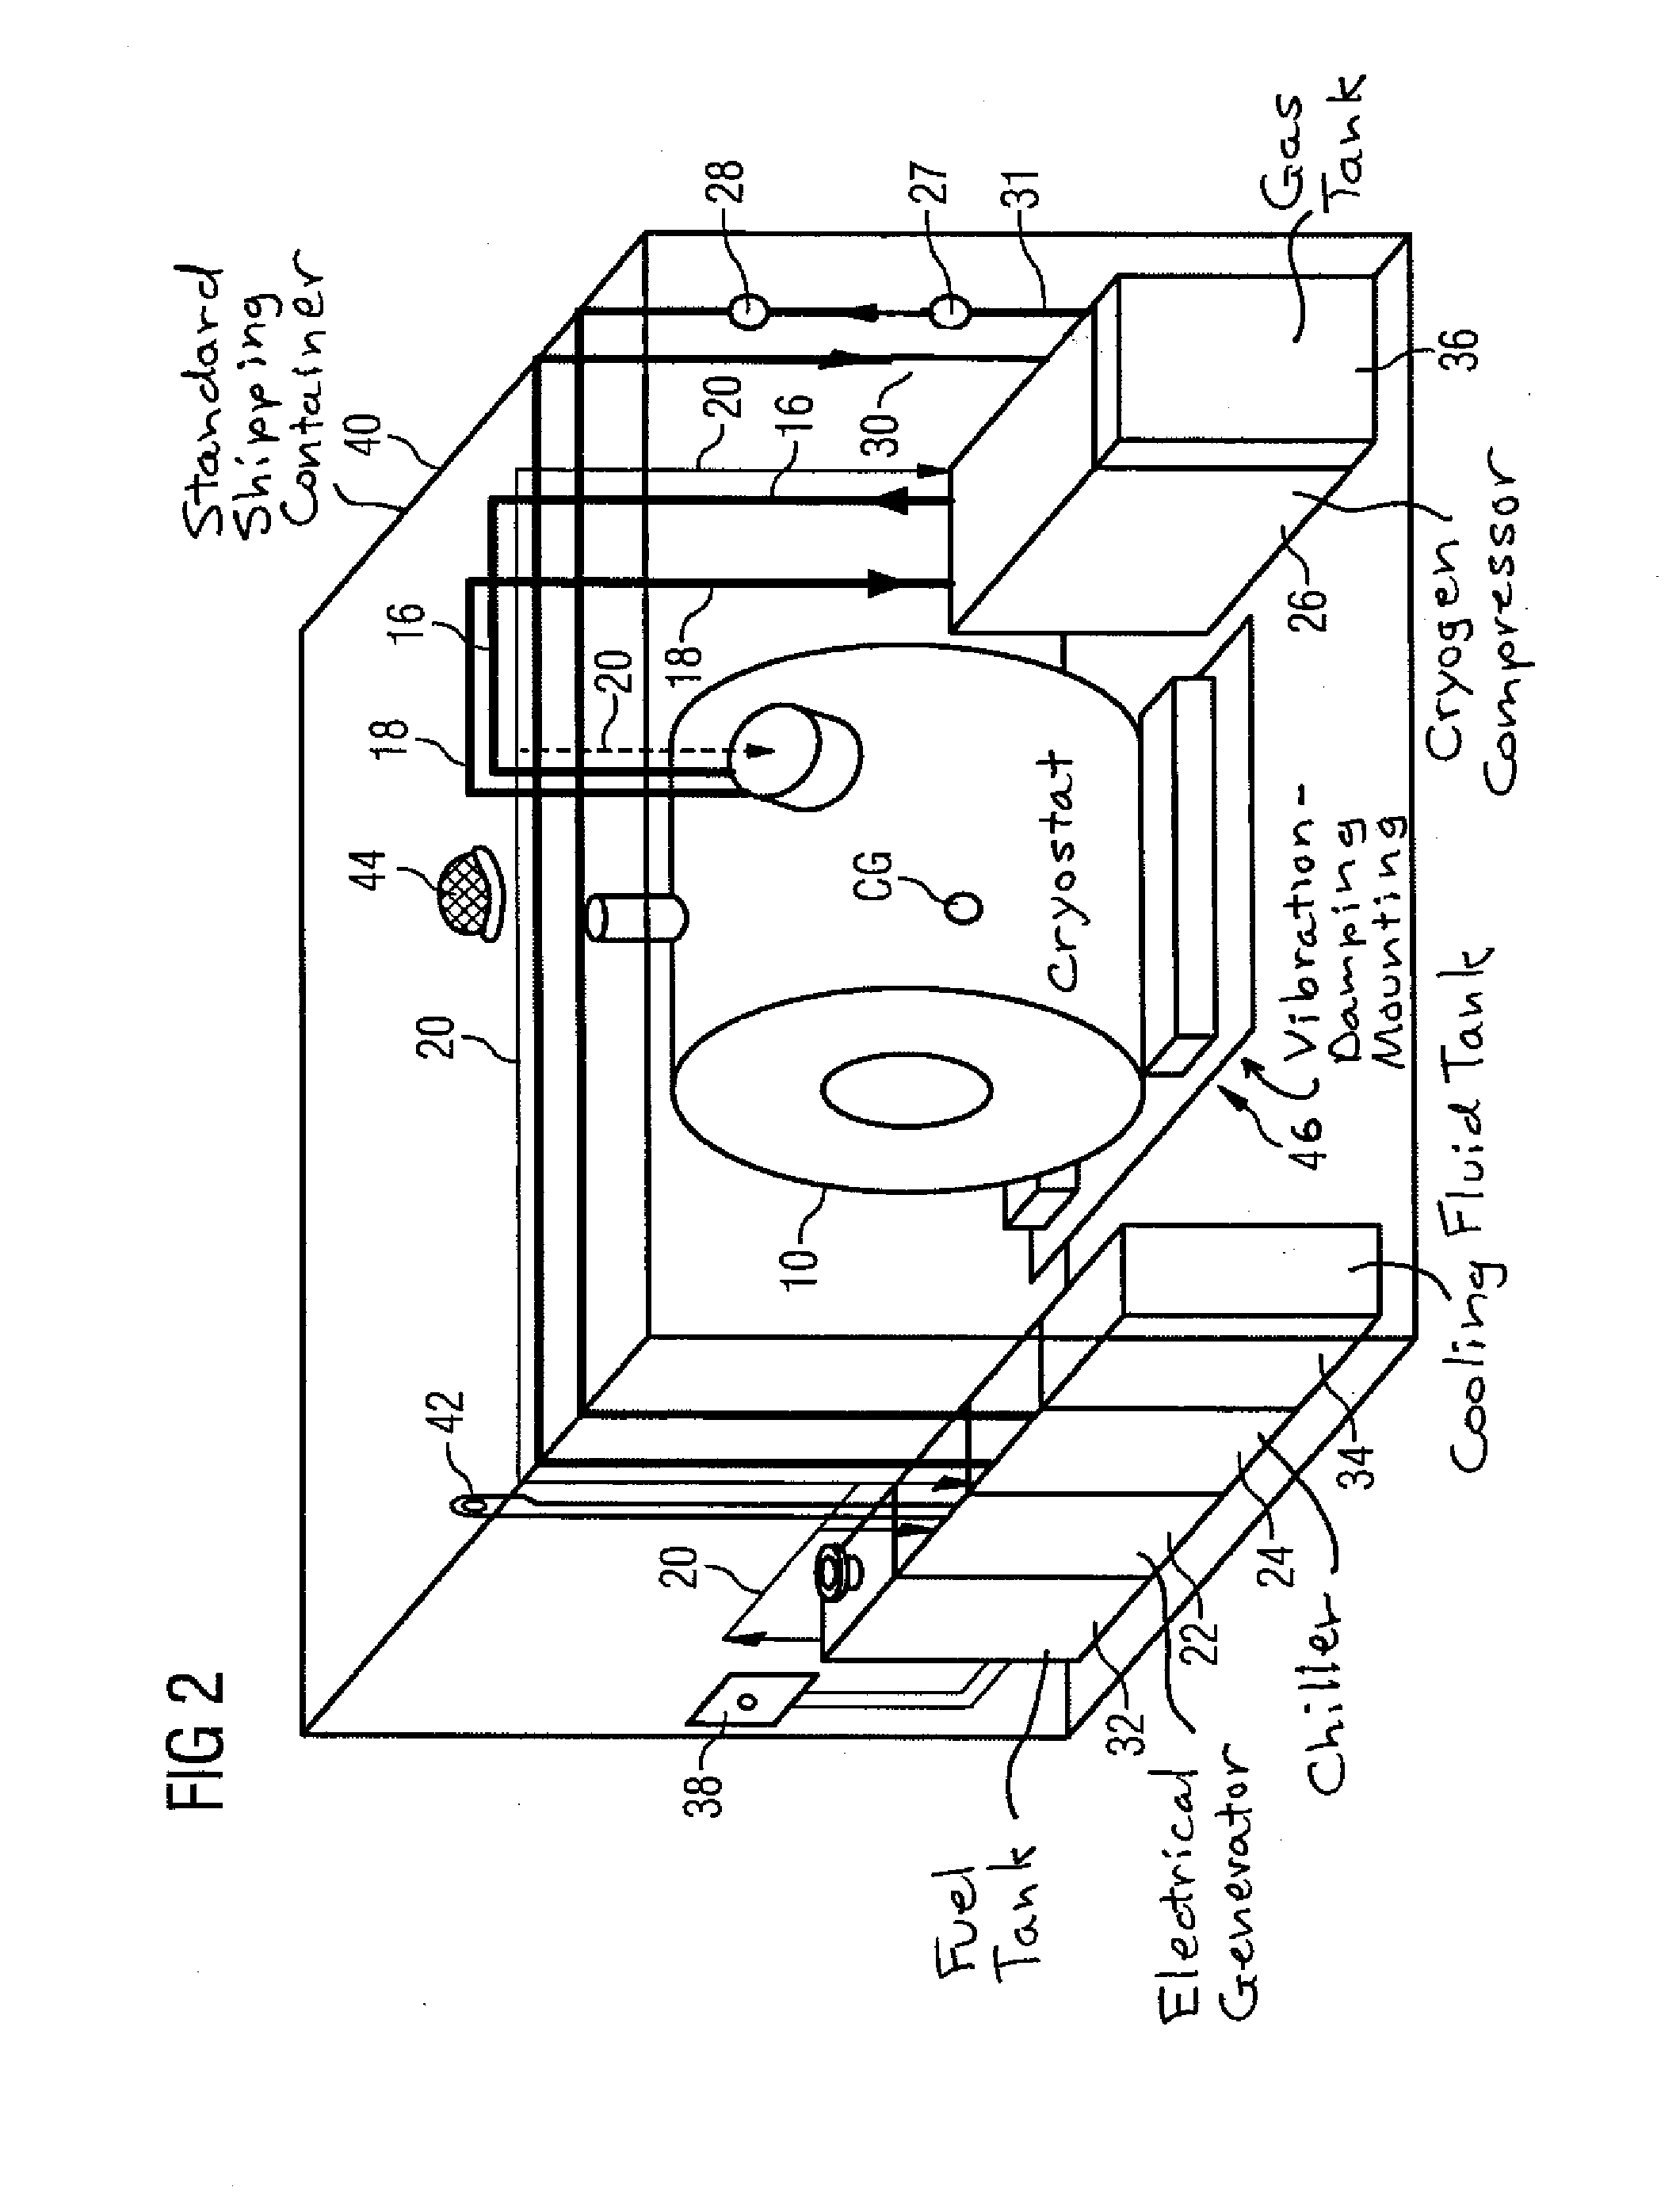 Apparatus and method for transporting cryogenically cooled goods or equipment